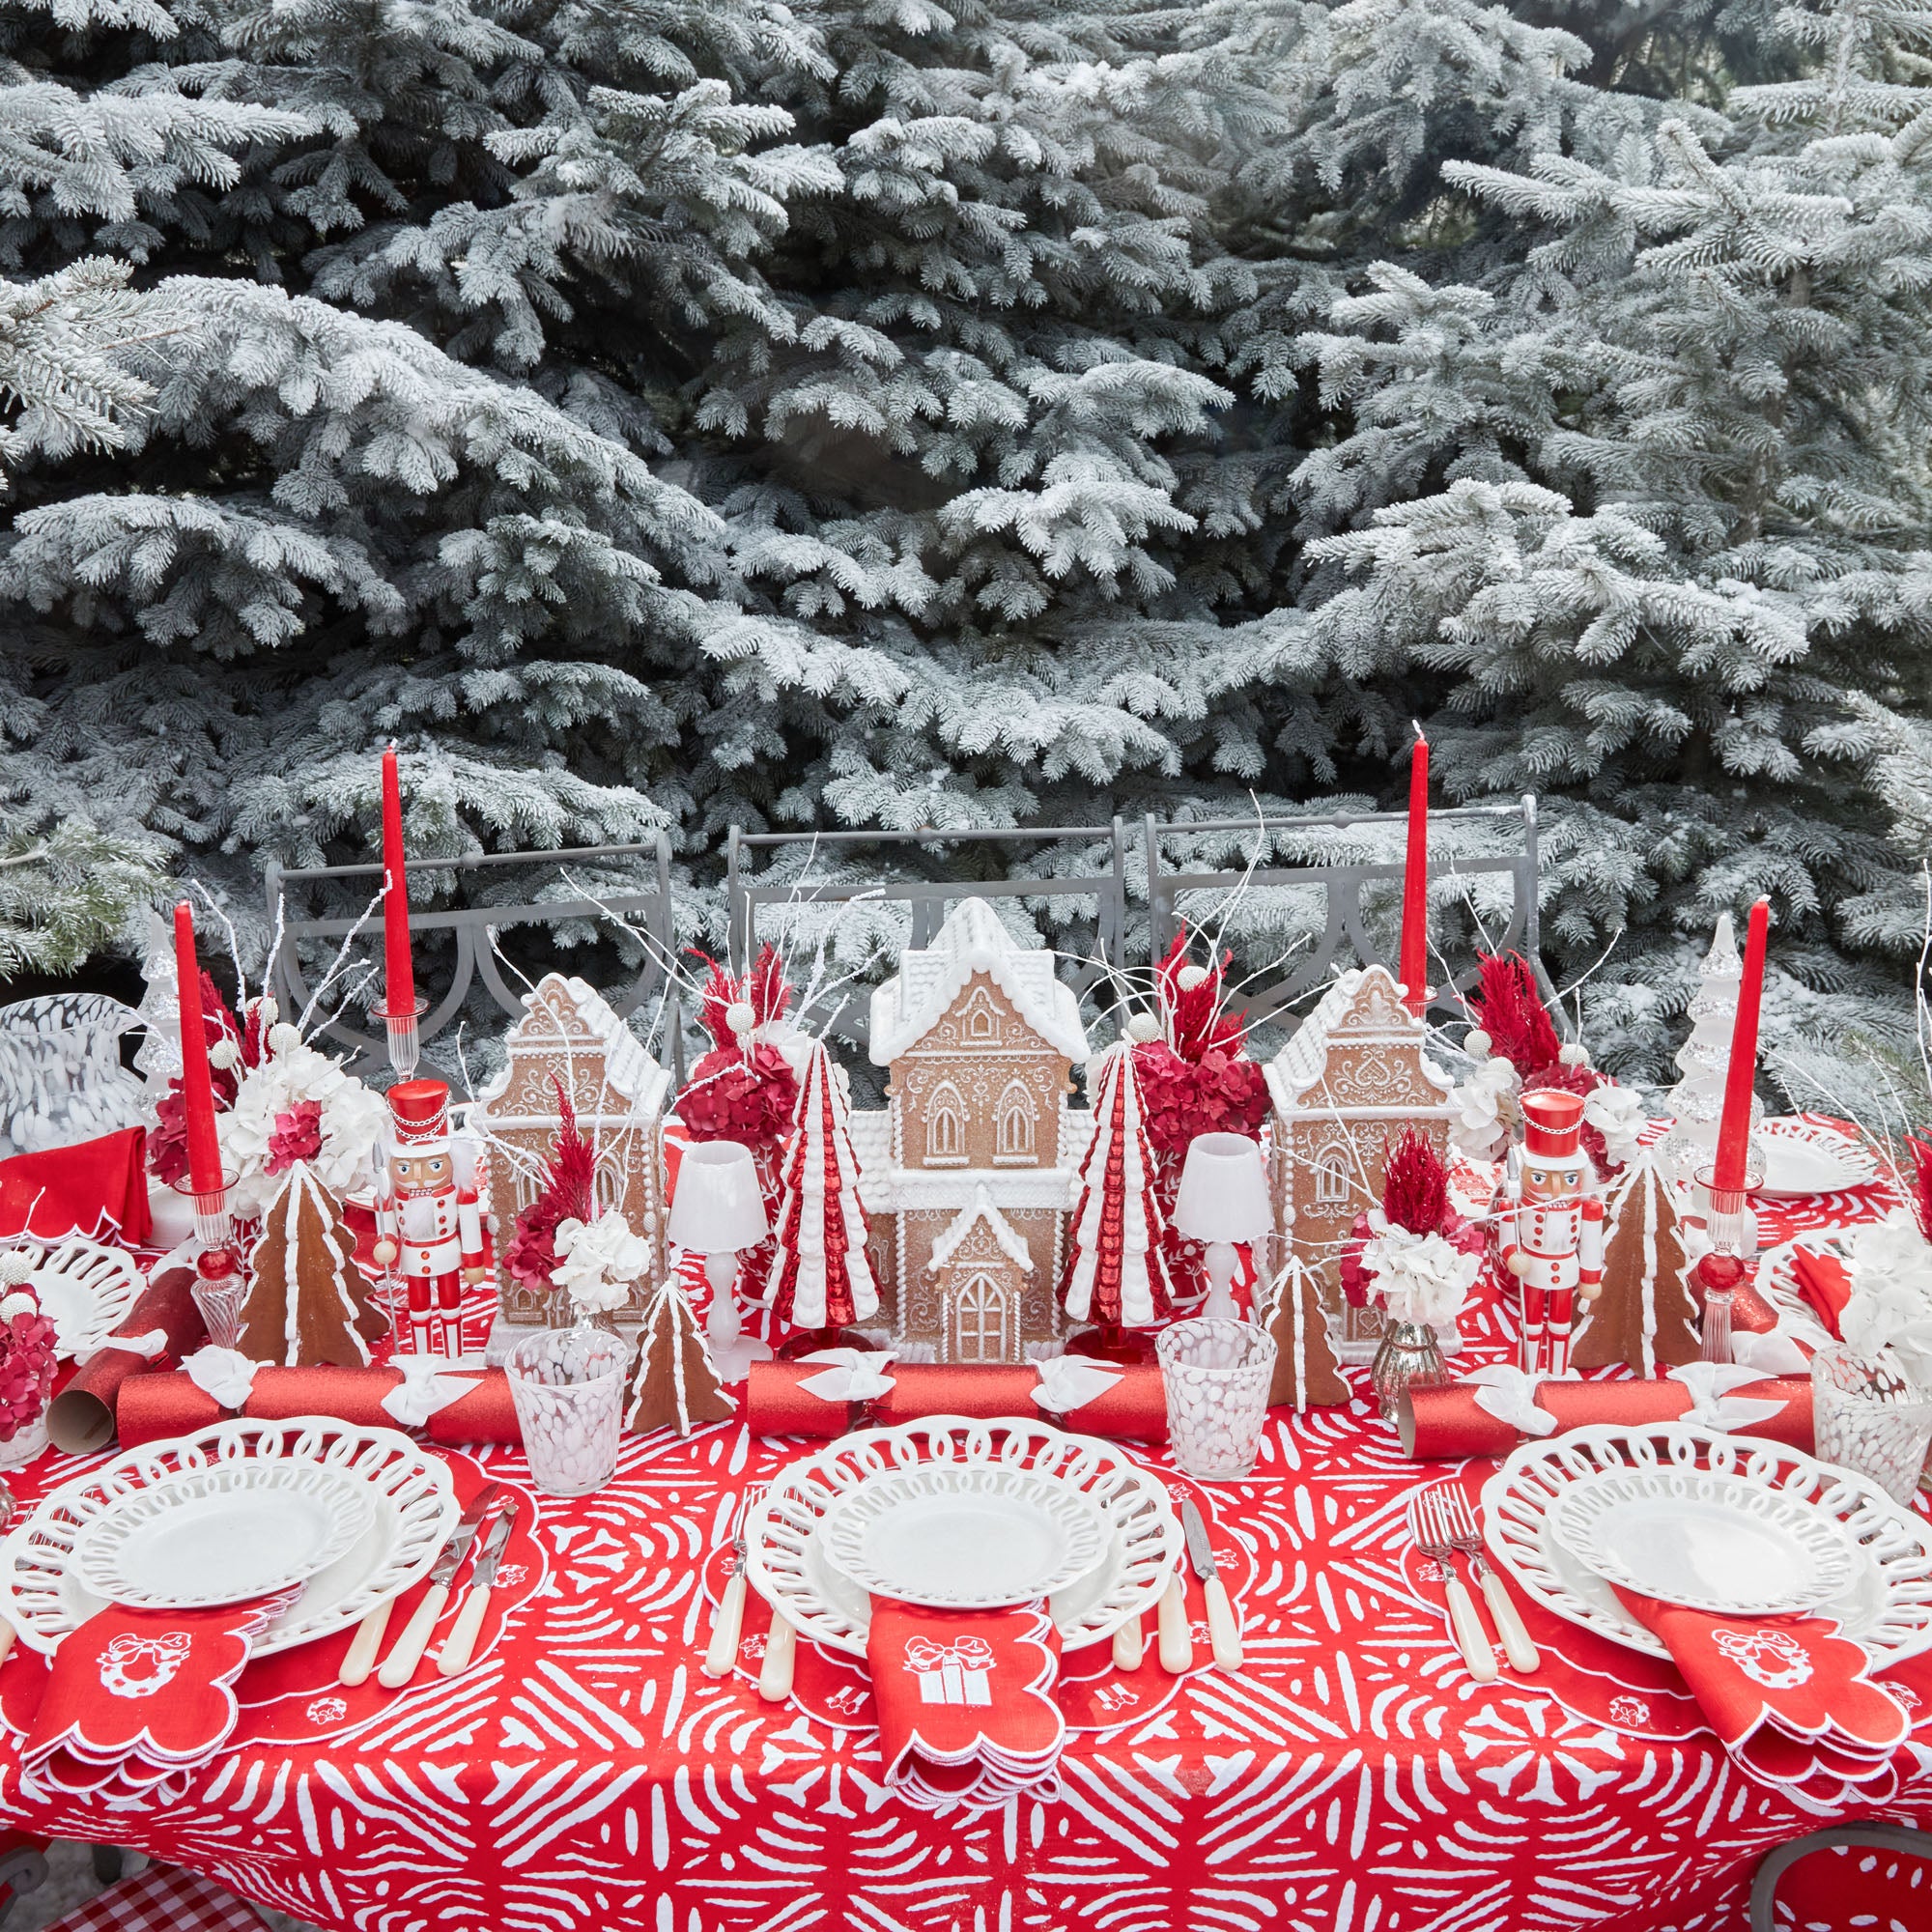 Christmas Linen Napkins with Frayed Edges, Christmas Red Napkins - Linenbee